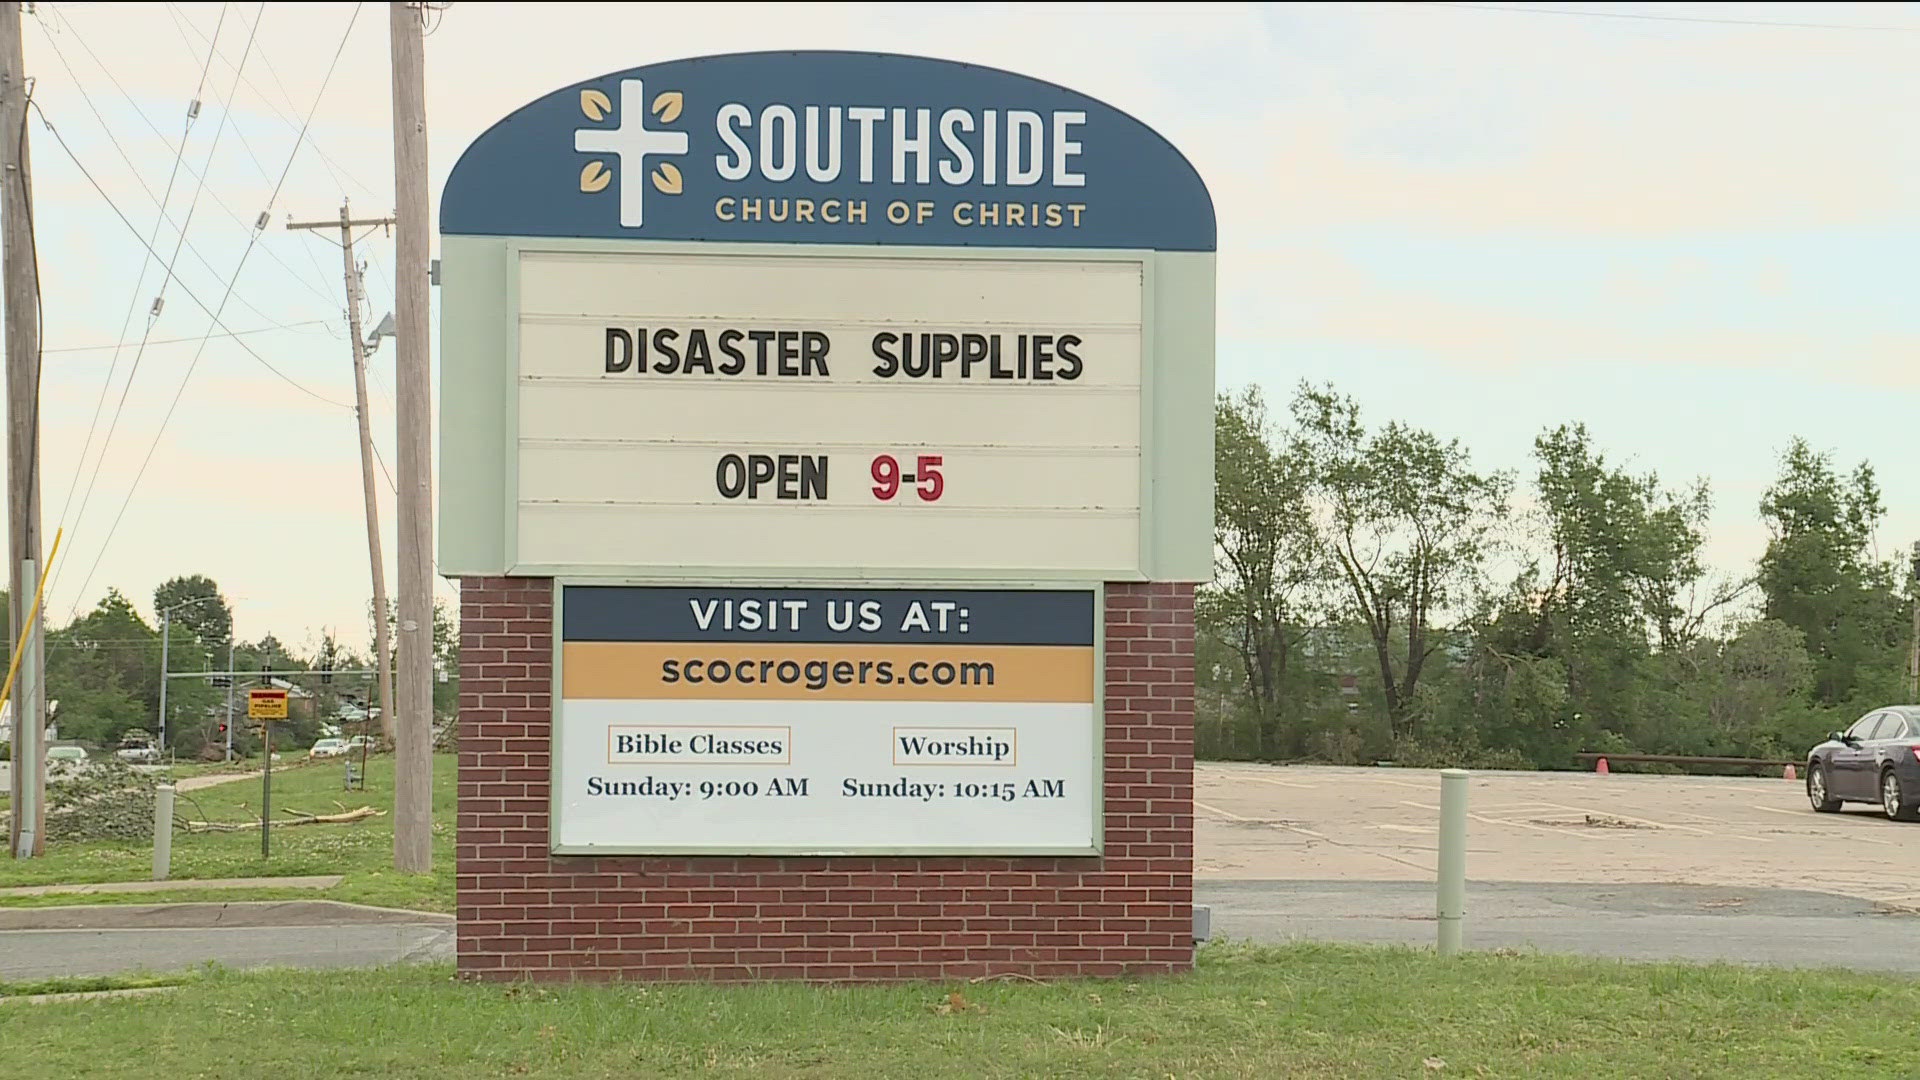 Southside Church of Christ is a hub for Church of Christ Disaster Relief Effort.